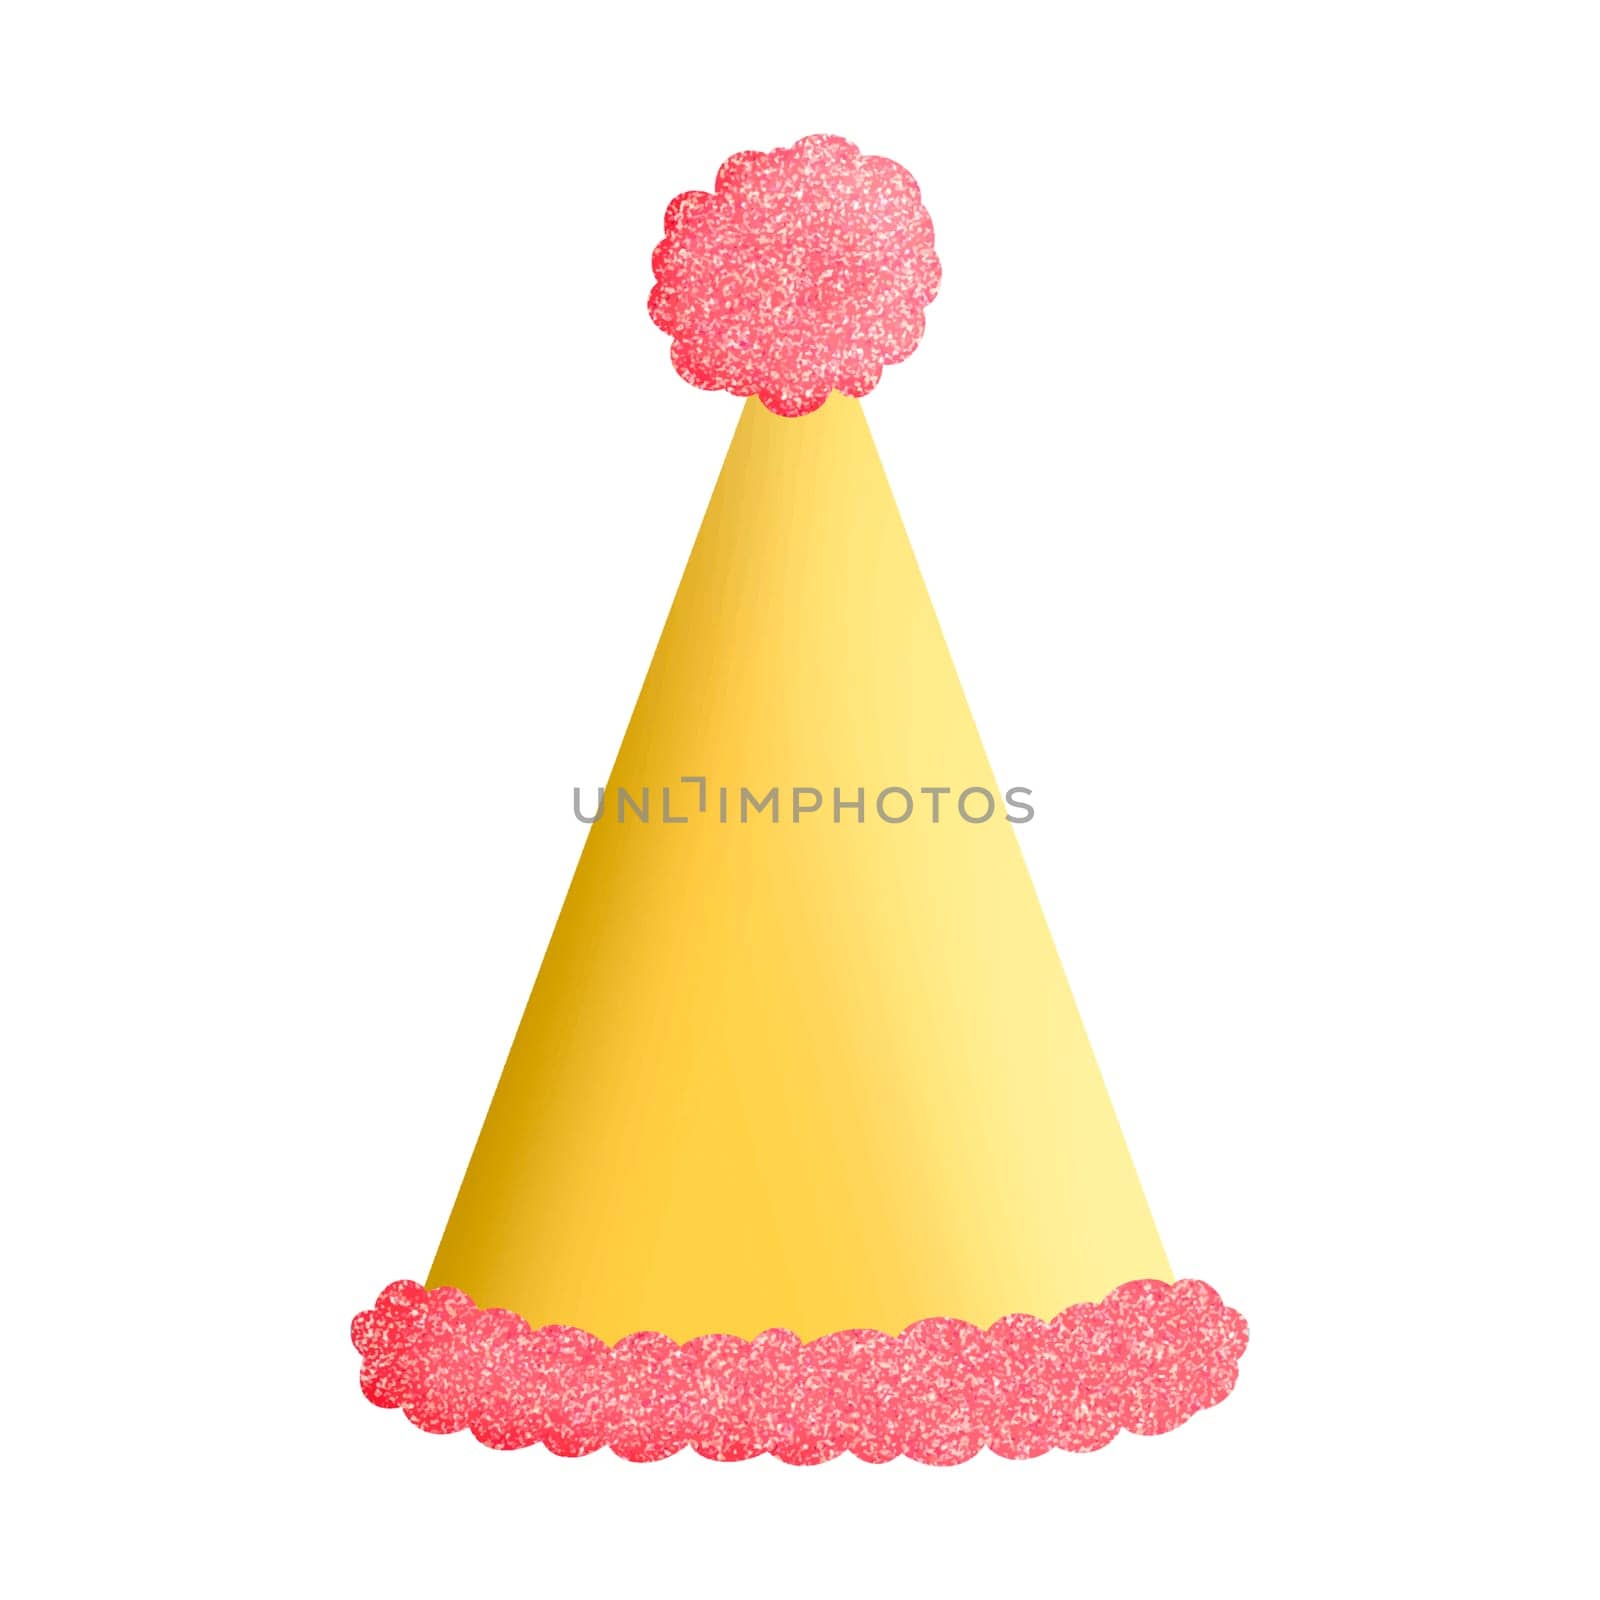 Gold Glitter Party Hat with Pink Pompom Isolated Clipart Illustration by Skyecreativestudio